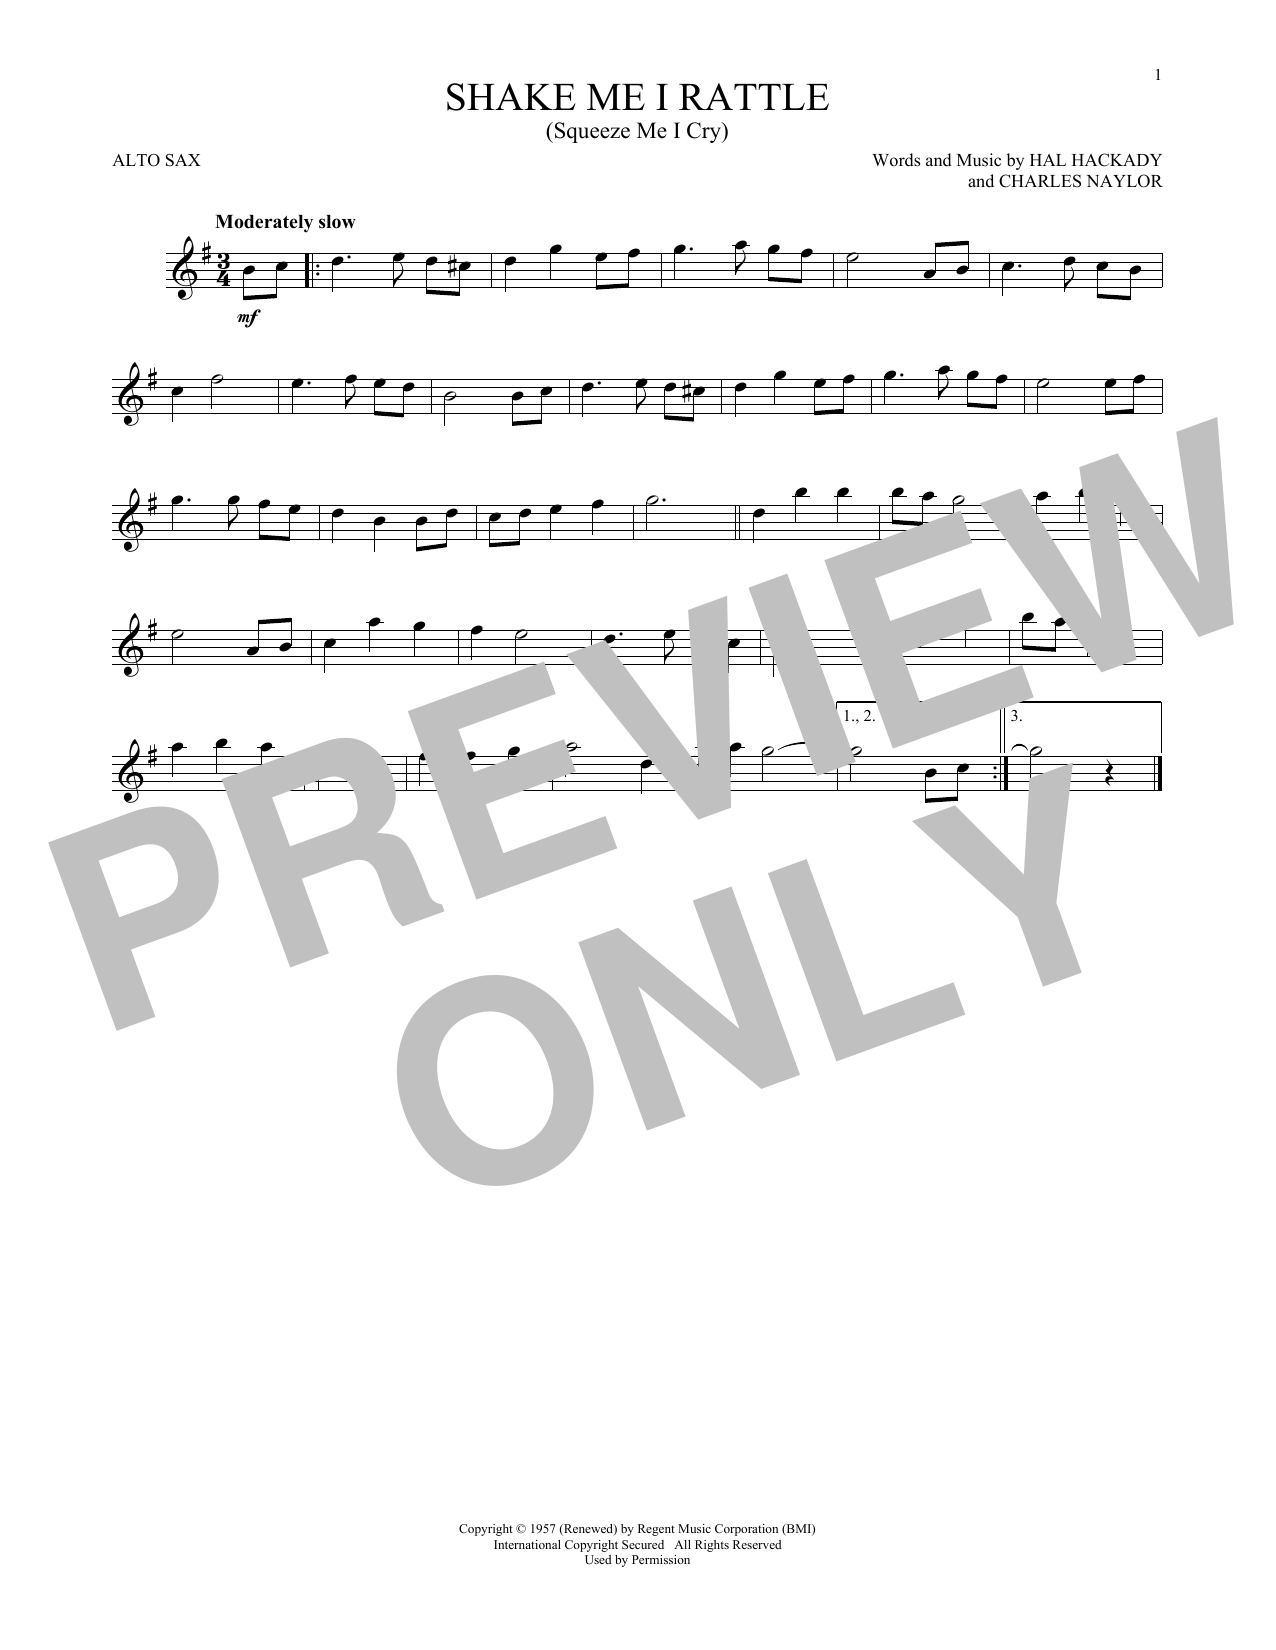 Download Hal Hackady Shake Me I Rattle (Squeeze Me I Cry) Sheet Music